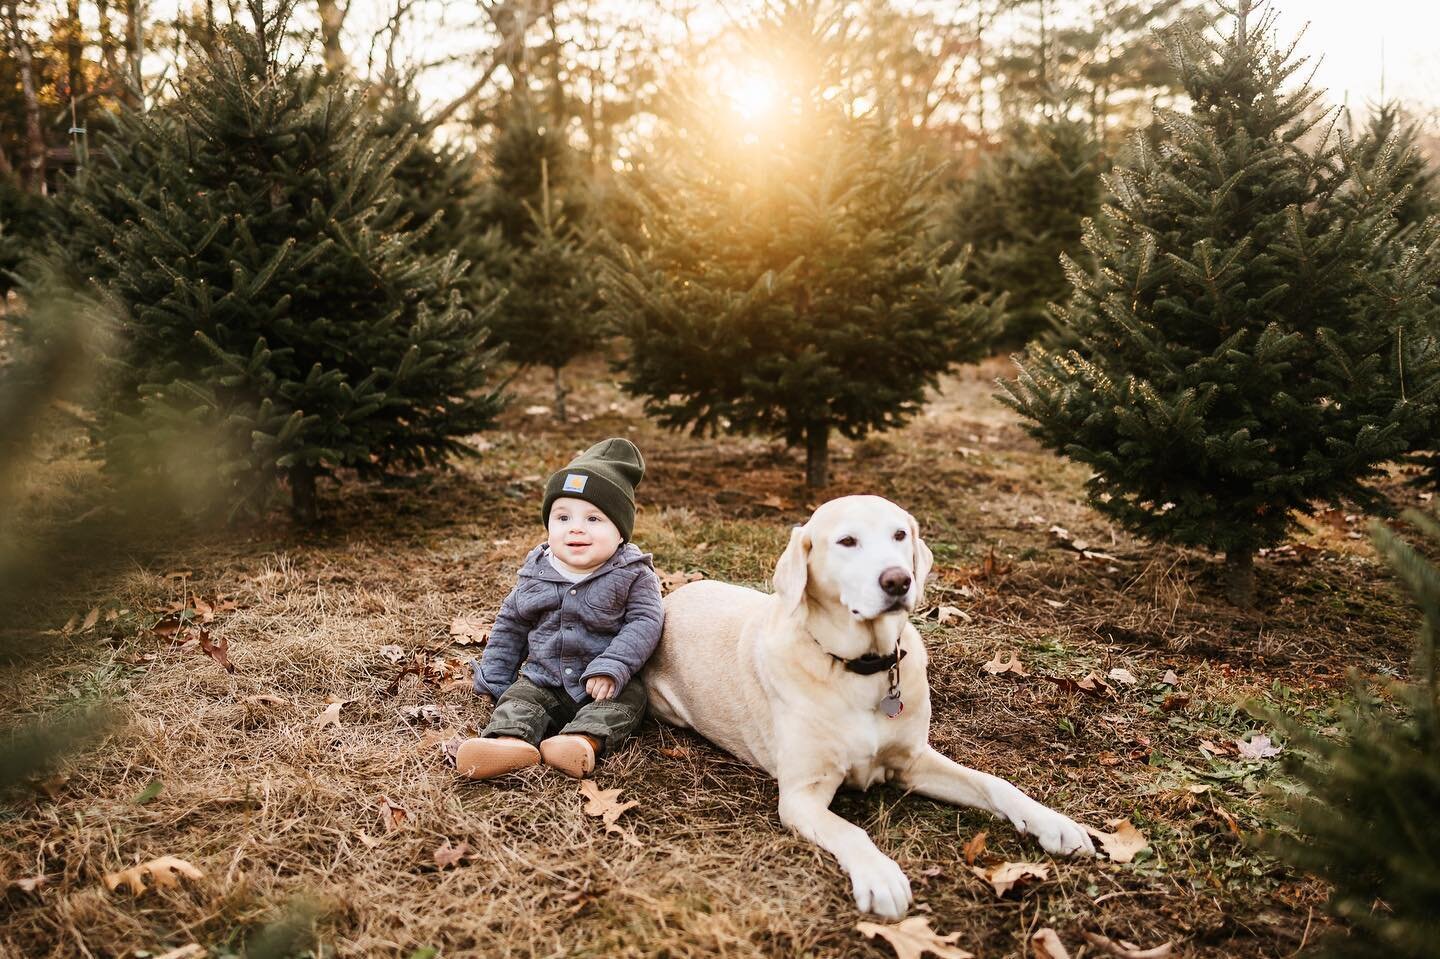 All galleries have been delivered!!! FEELS GOOOOOD 🌲. Back at it this weekend for a few more but will be enjoying my 0 editing backlog for these next 20 hours. How cute are these two?! What&rsquo;s everyone up to this weekend? #cjkeysphotos
.
.
.

#